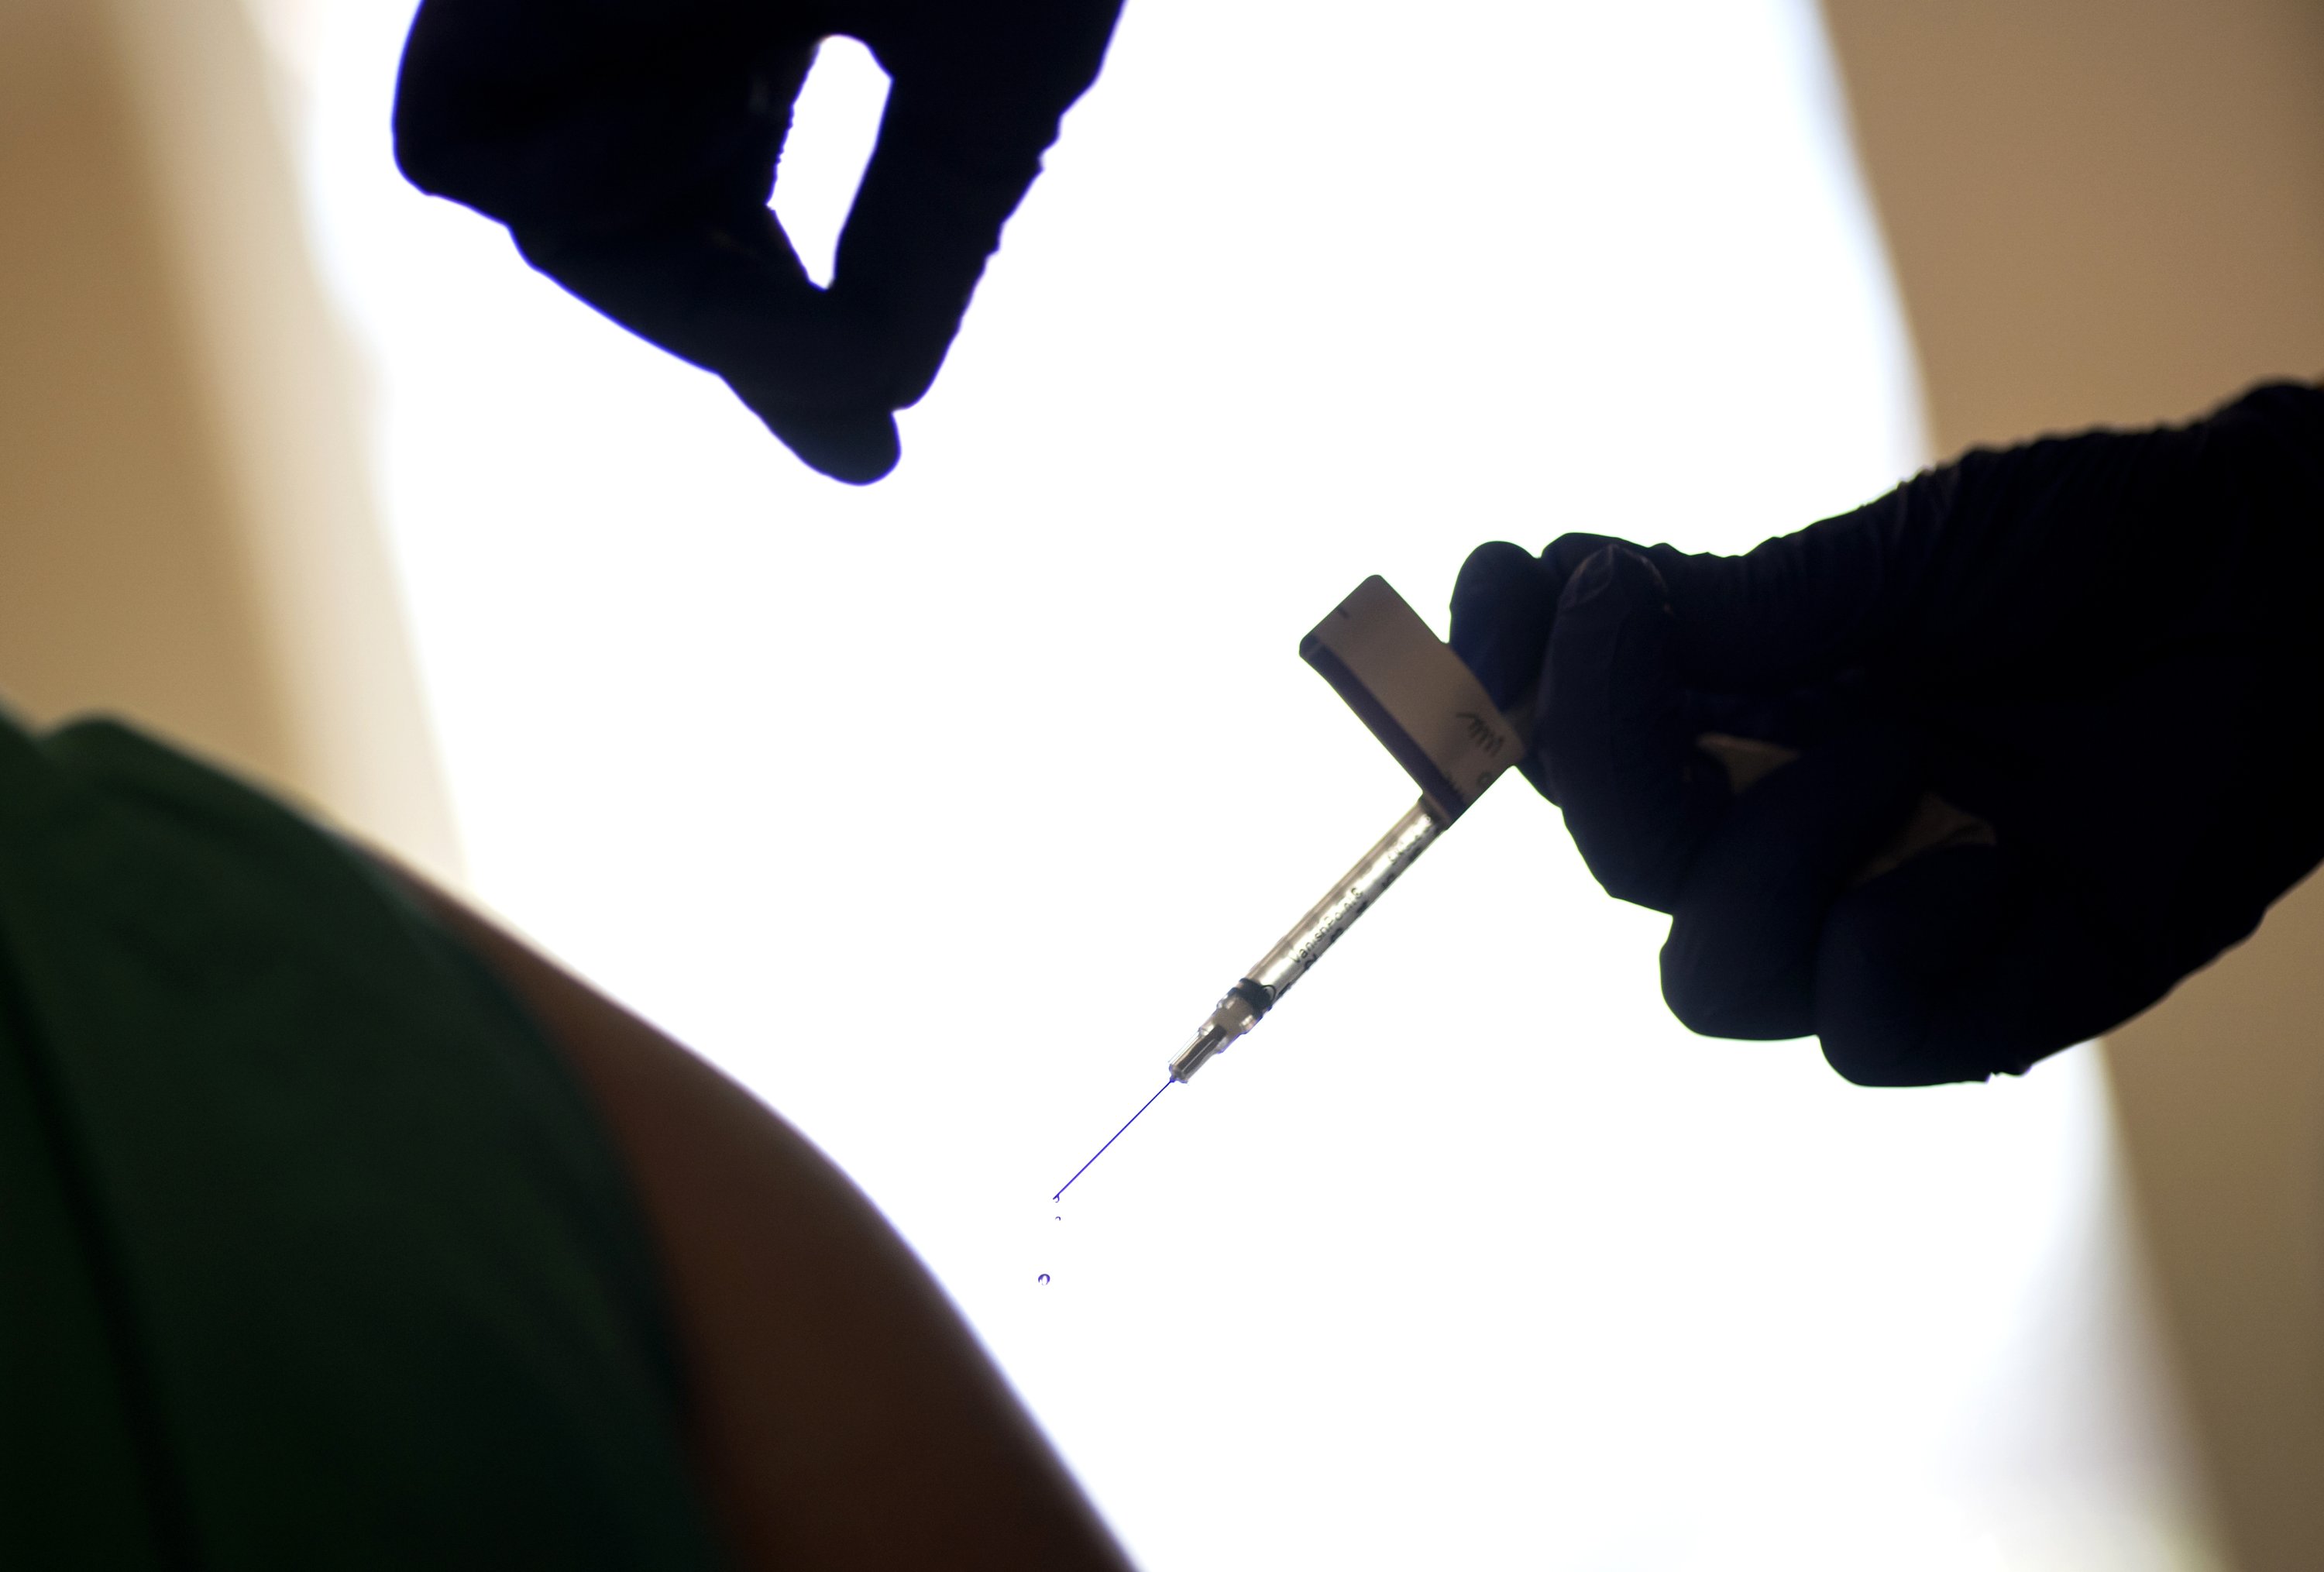 In this Tuesday, Dec. 15, 2020, file photo, a droplet falls from a syringe after a health care worker was injected with the Pfizer-BioNTech COVID-19 vaccine at a hospital in Providence, R.I. (AP Photo)